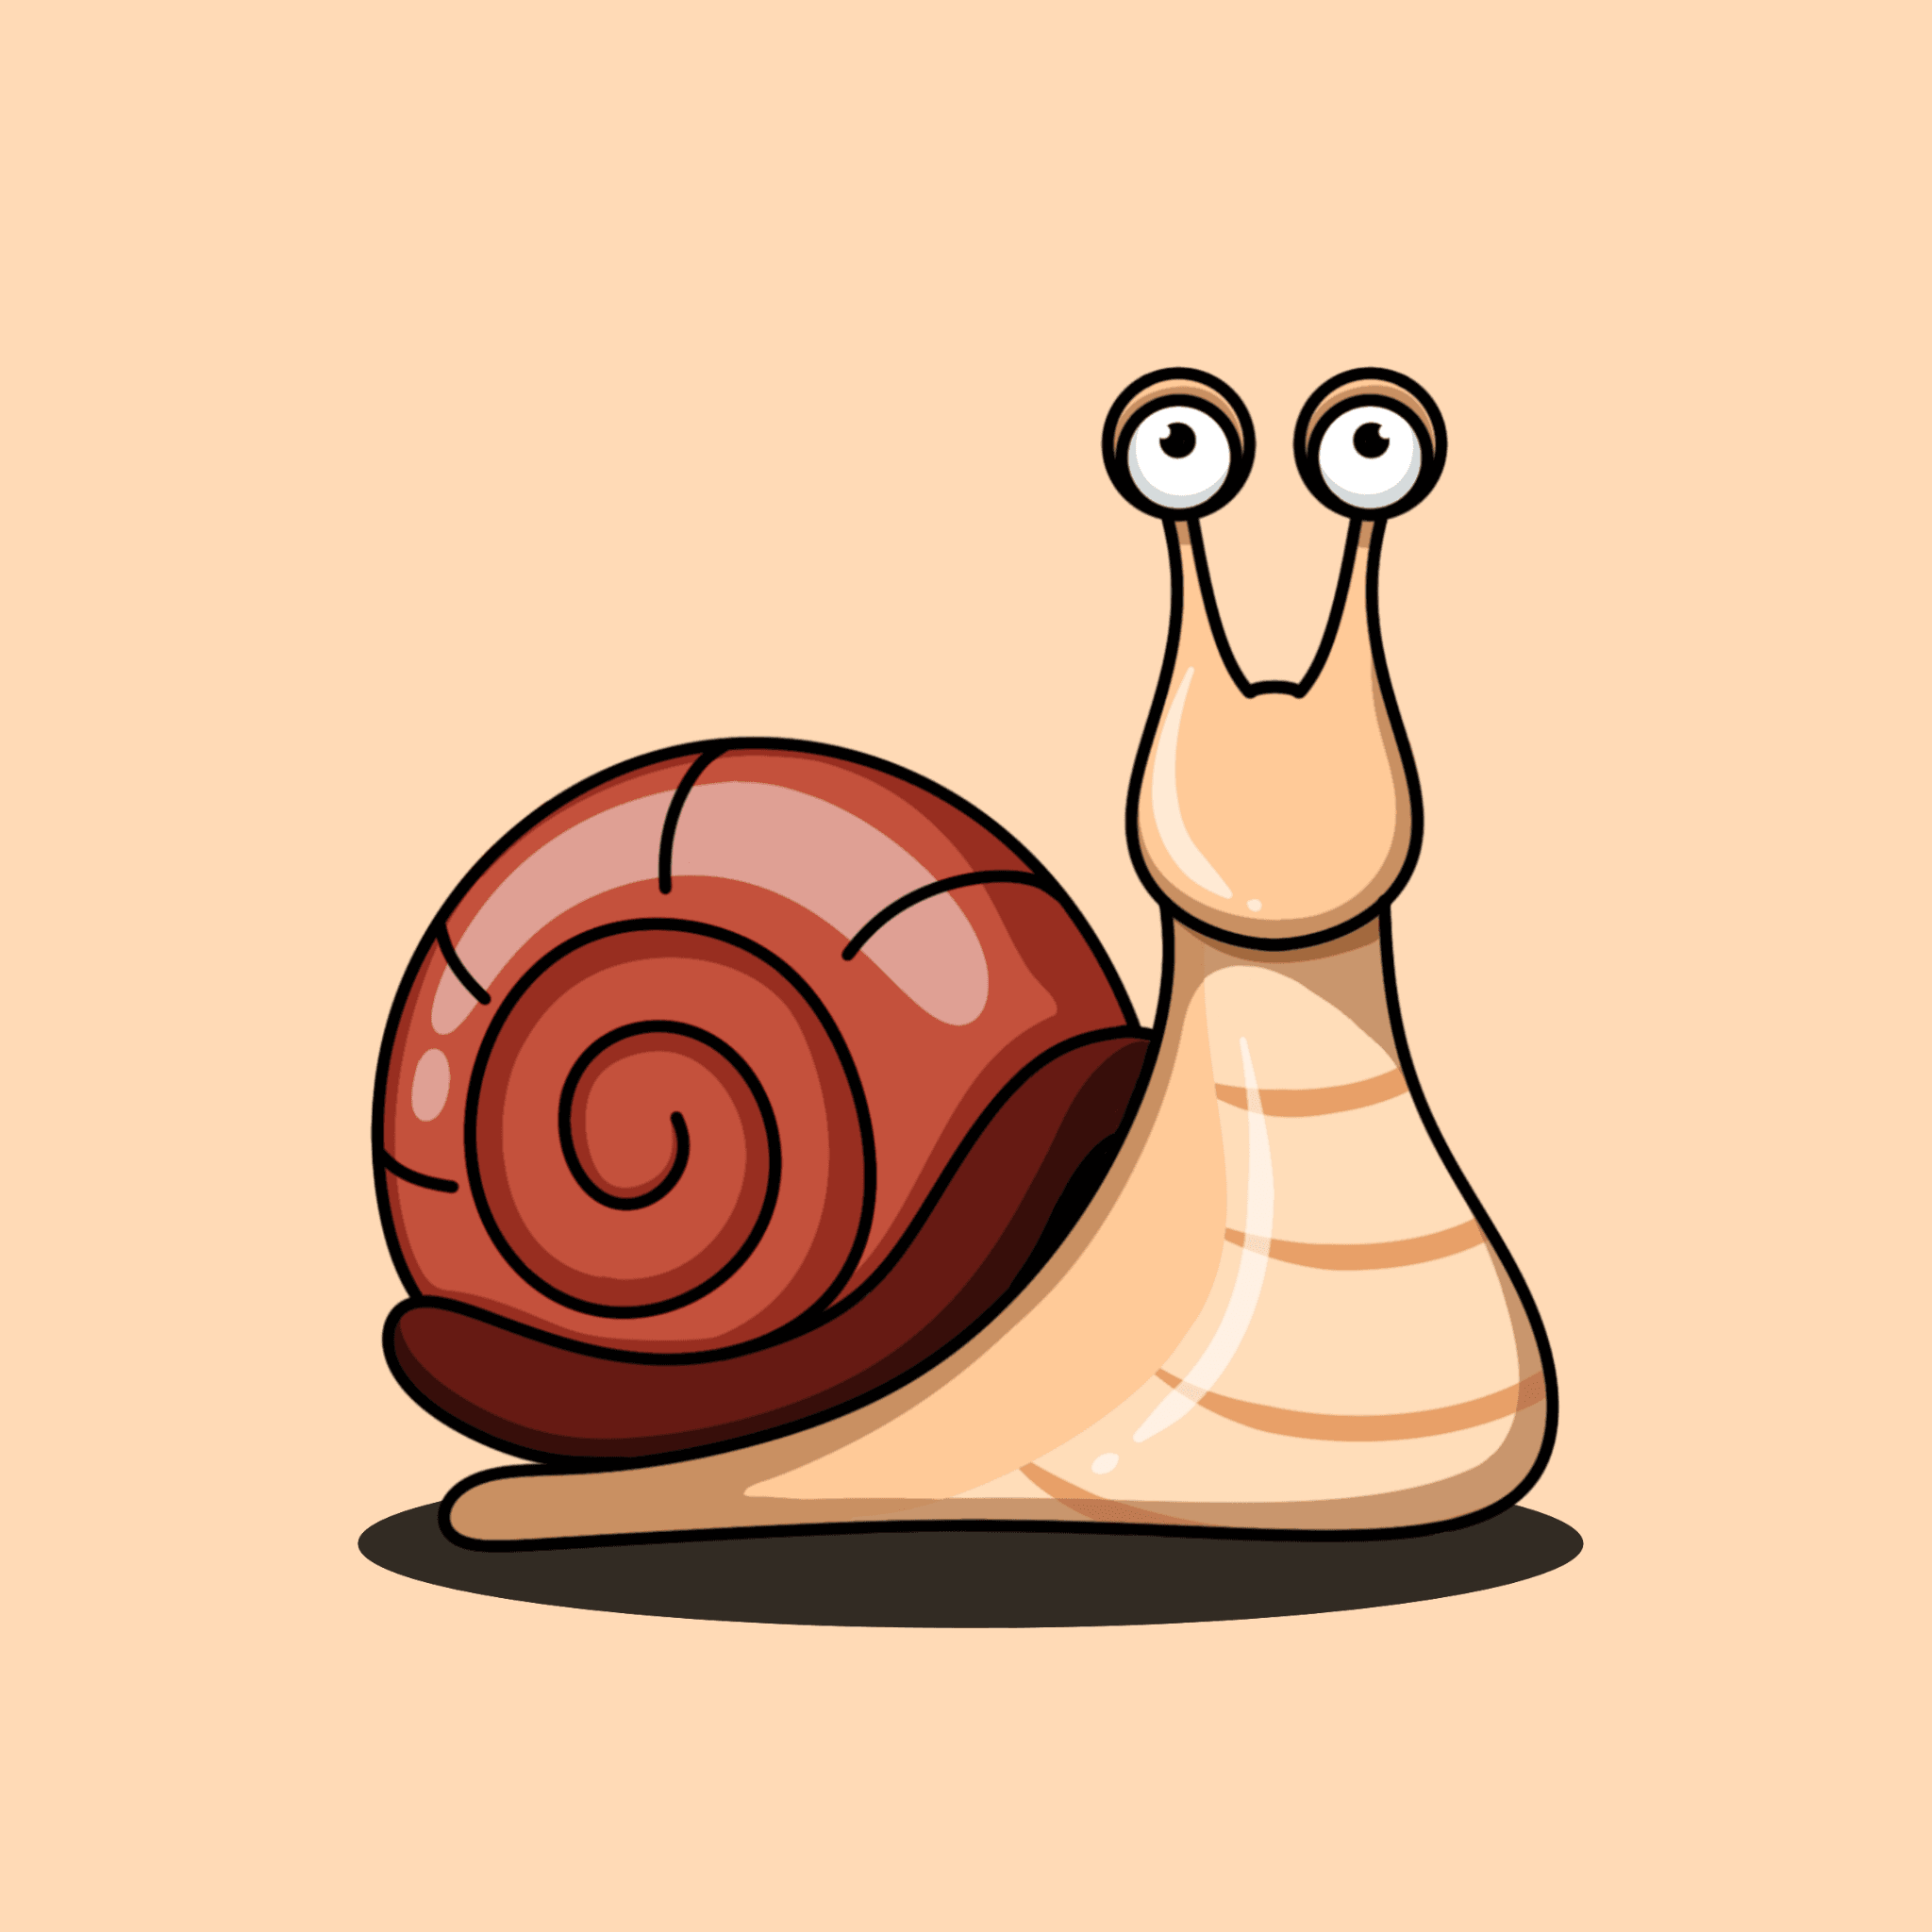 SnailFather